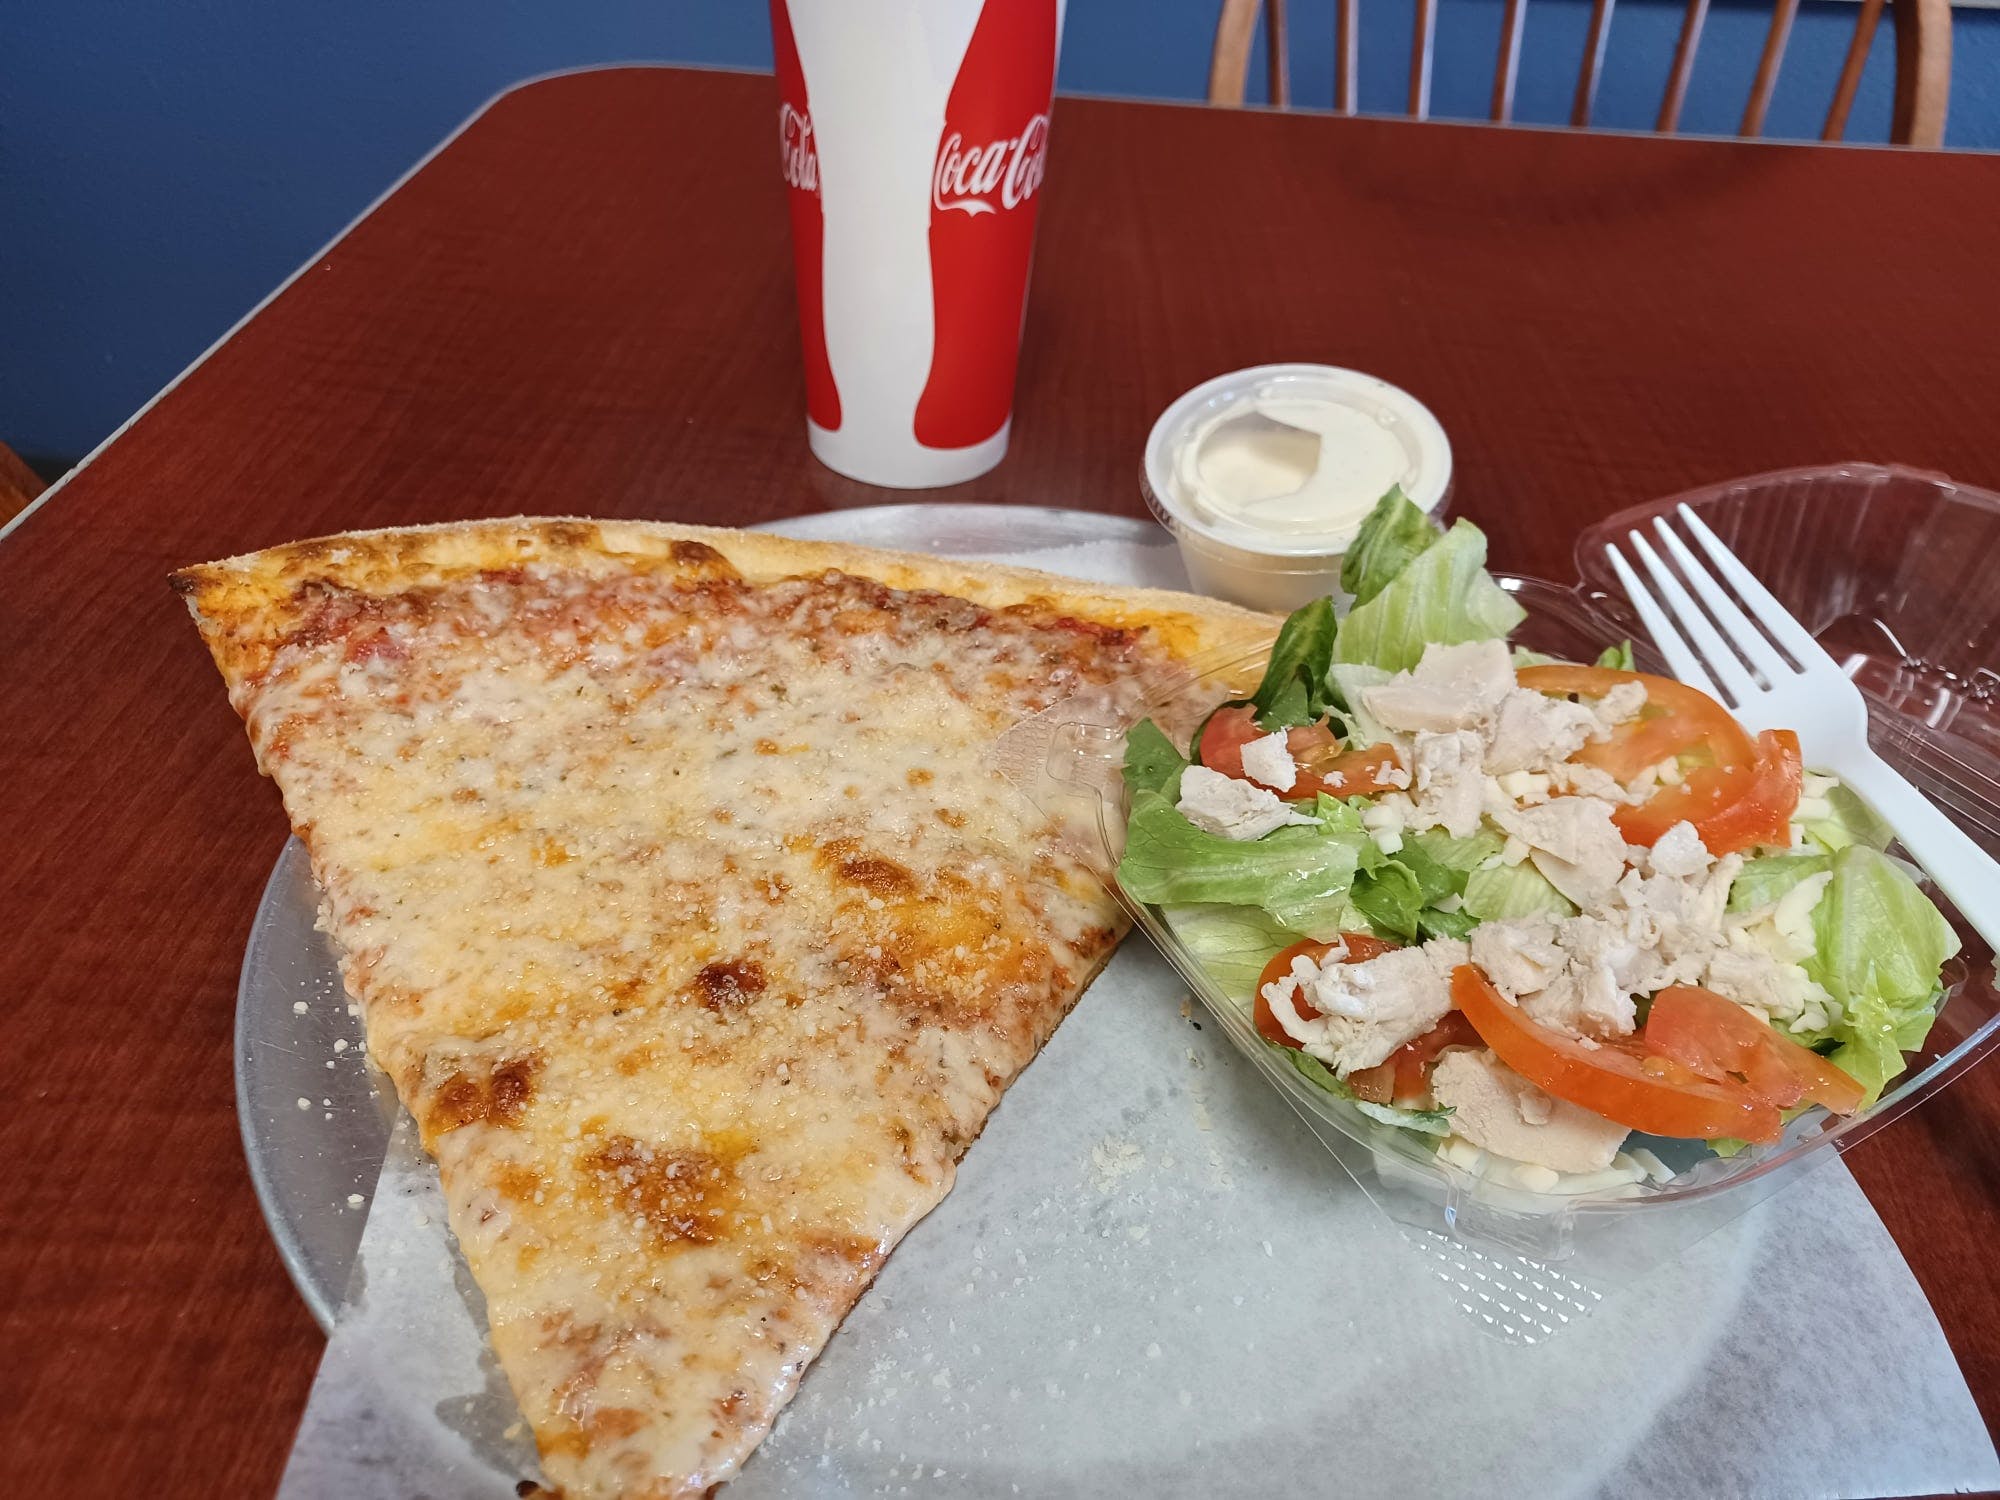 Online Ordering - Papa's Pizza Parlor